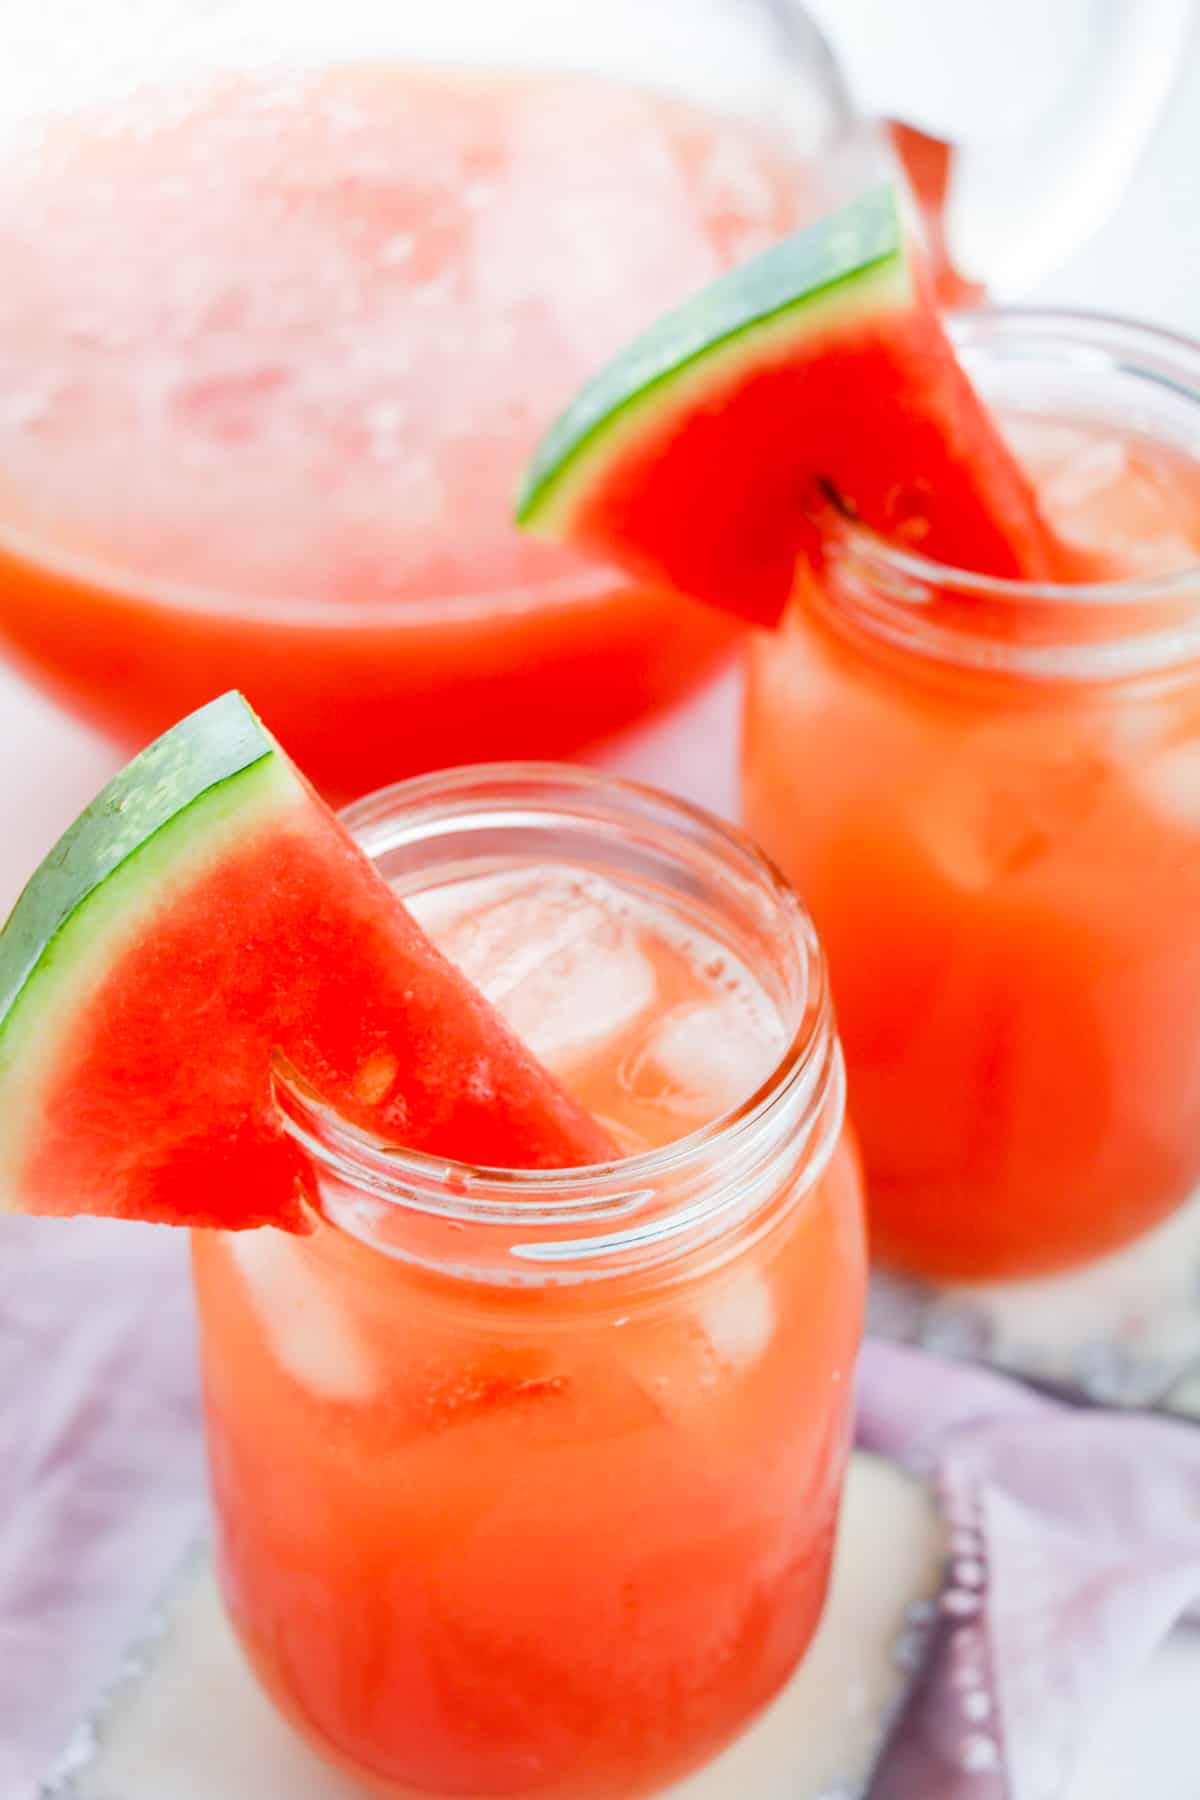 Watermelon lemonade in glass pitcher and served in two glasses with fresh watermelon wedges for garnish